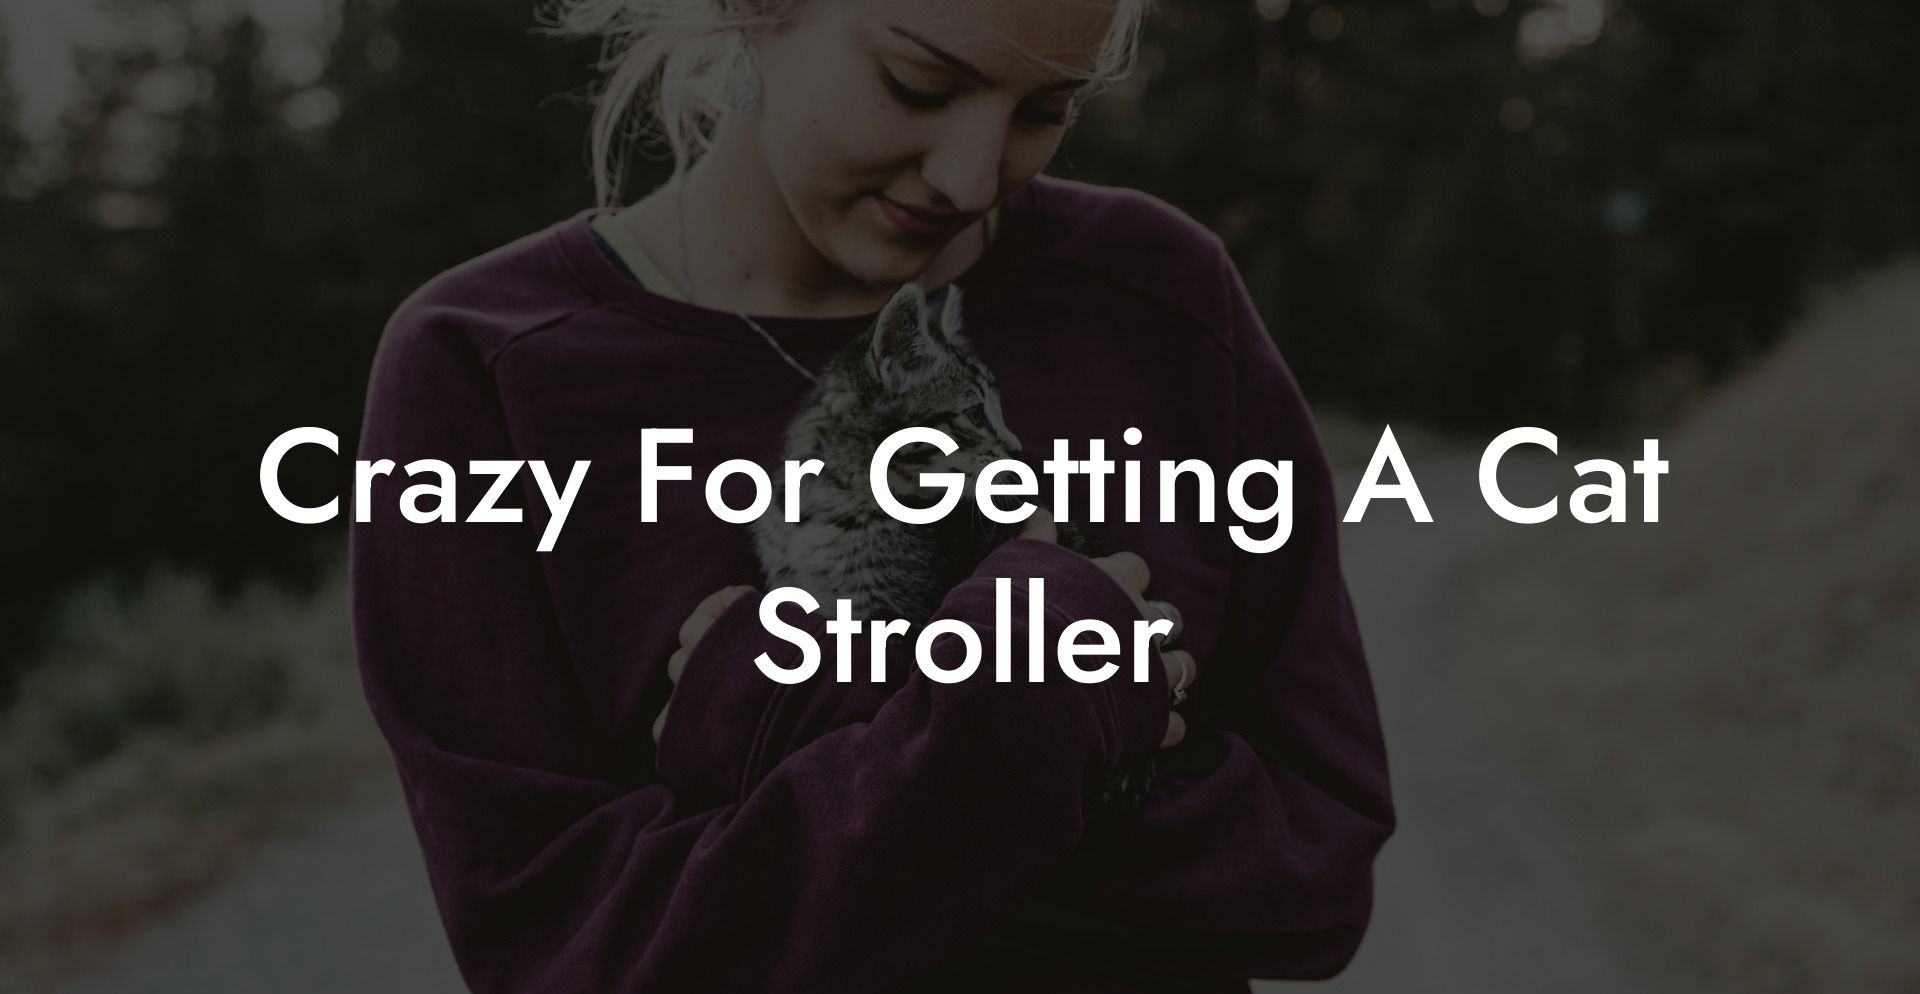 Crazy For Getting A Cat Stroller